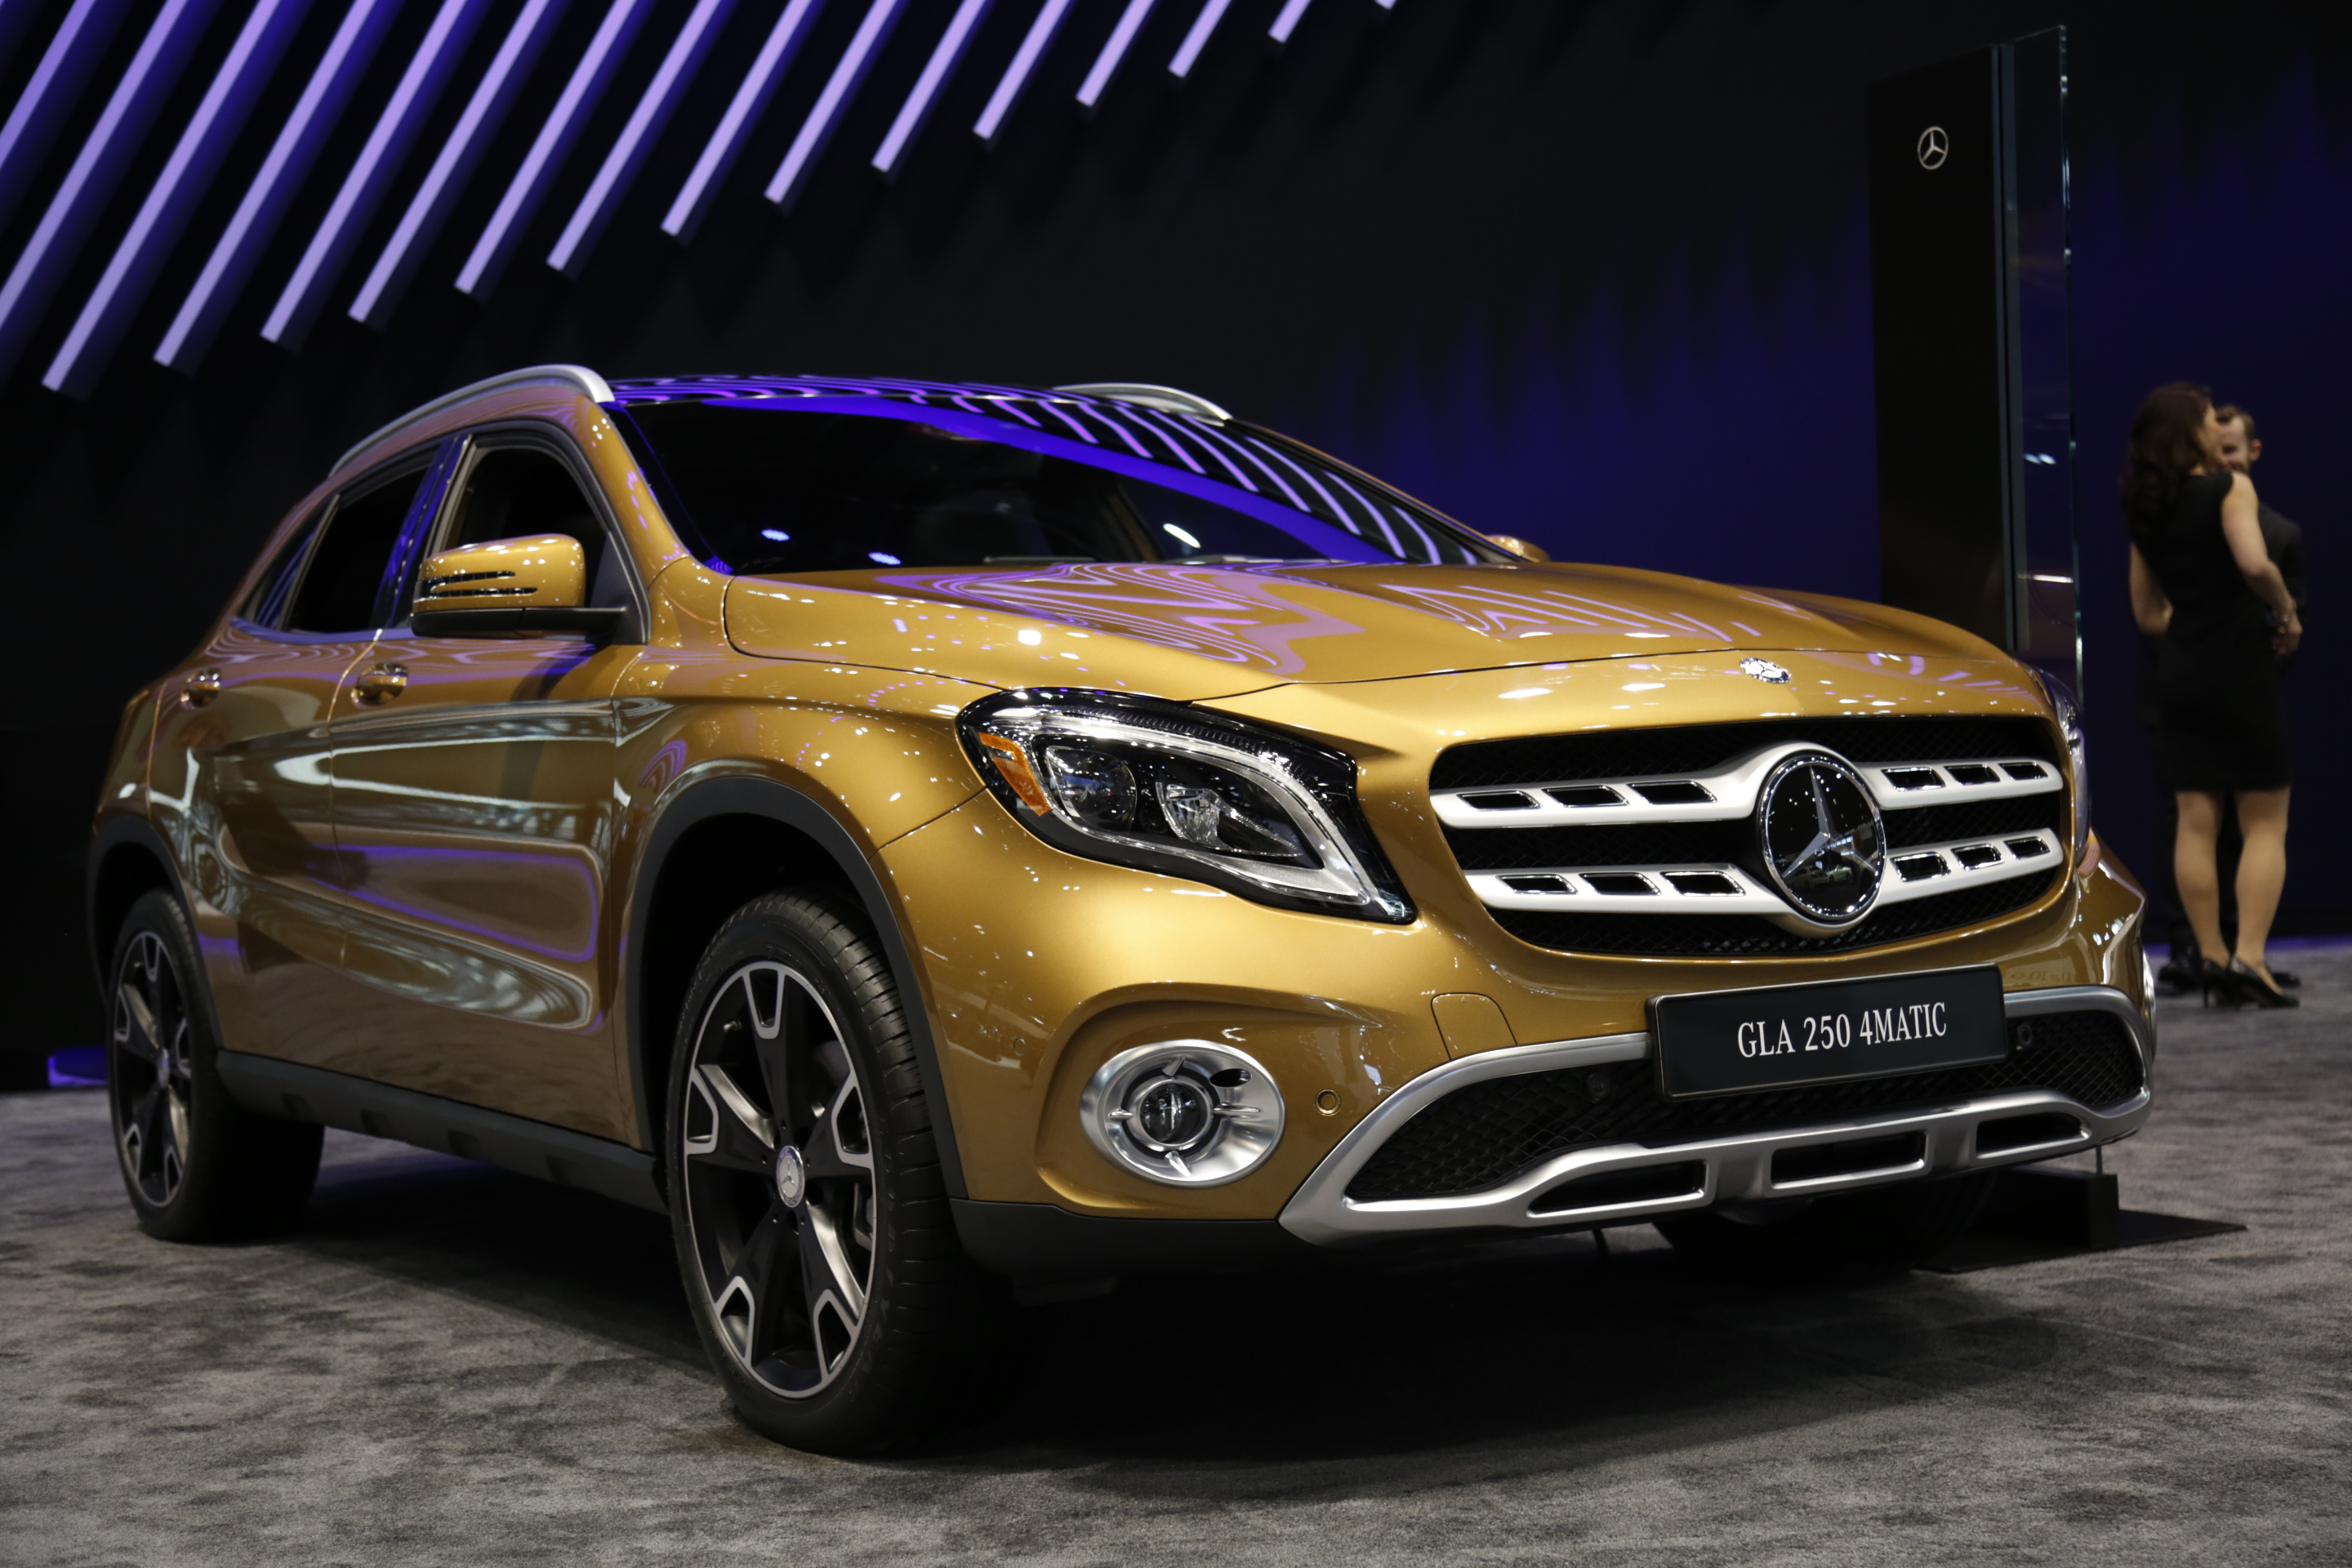 Mercedes-Benz at the 2017 Chicago Auto Show